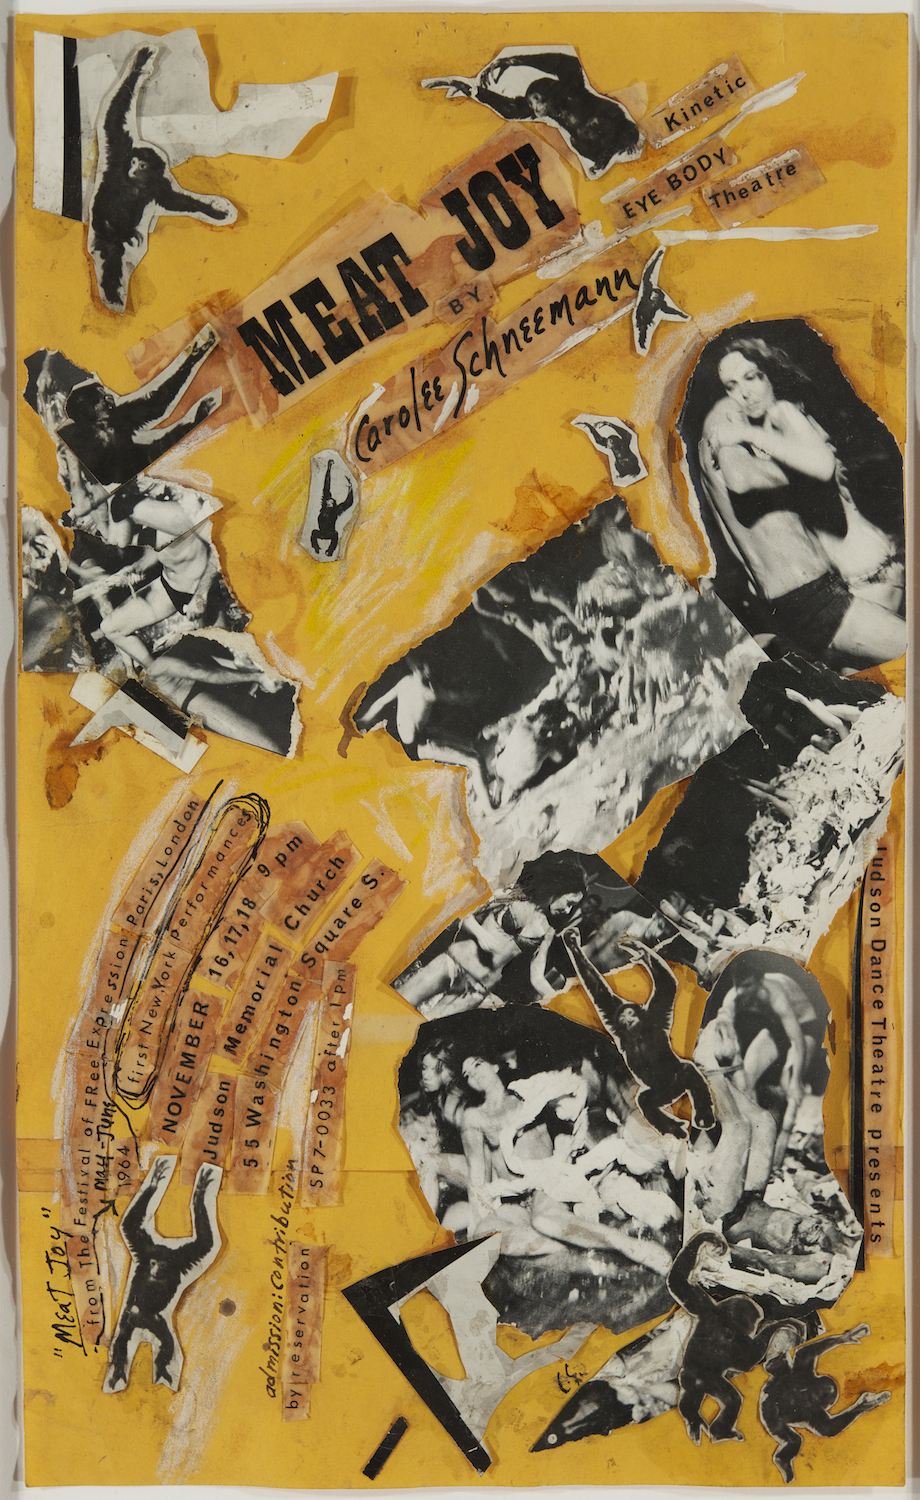 photo collage on a yellow background; black and white cutouts of stills from meat joy performances; black and white cutouts of images of monkeys; across the poster are details for an upcoming performance